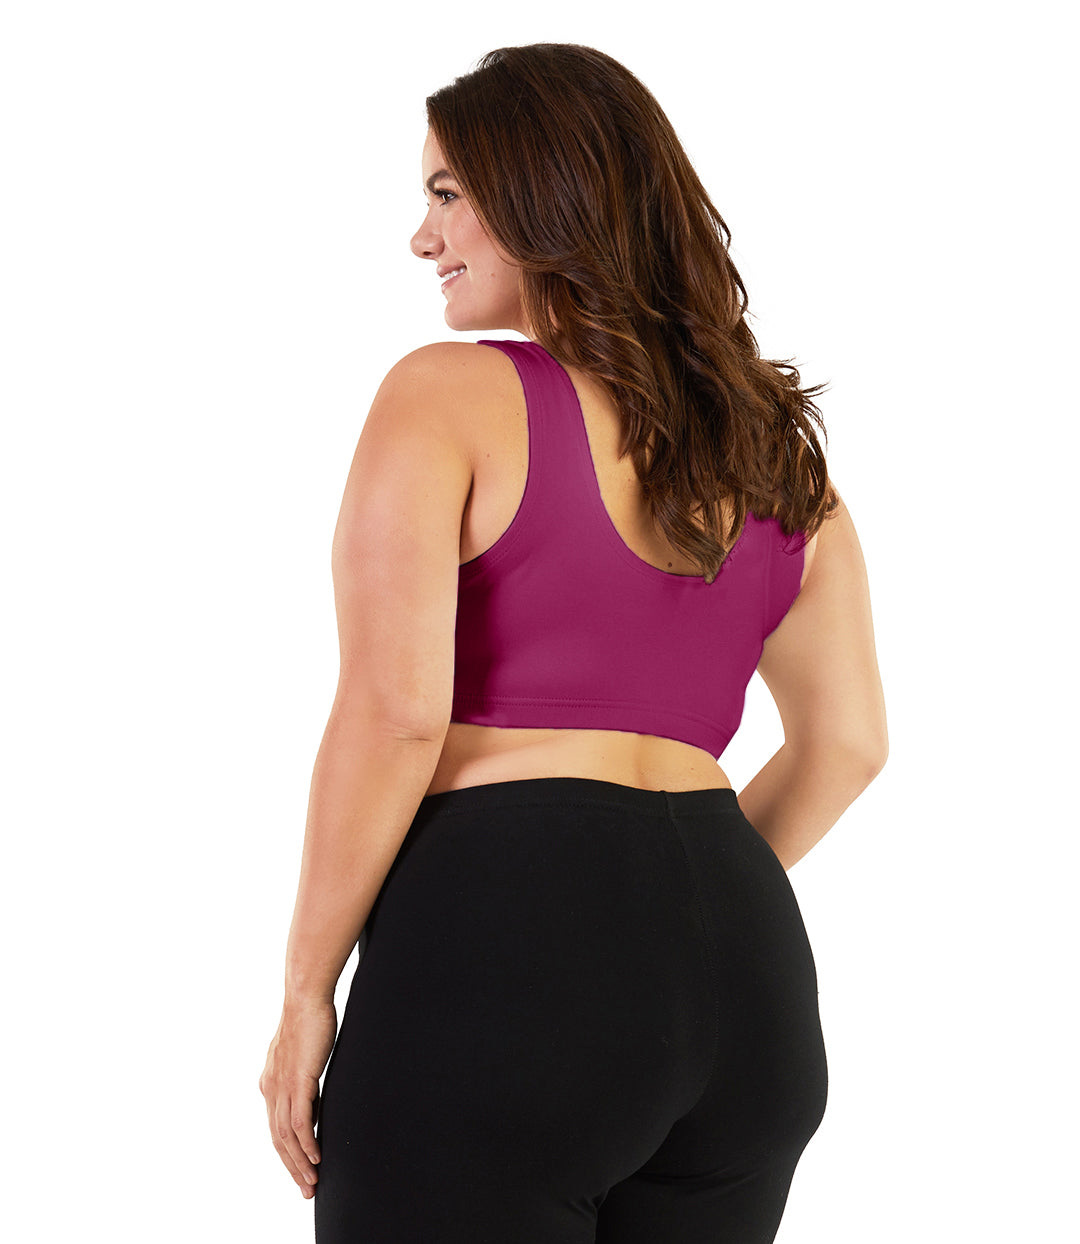 Plus size woman, facing back, wearing JunoActive plus size Stretch Naturals Scoop Neck Bra in Merlot. The woman is wearing black plus size JunoActive leggings. Her arms fall naturally to her side.